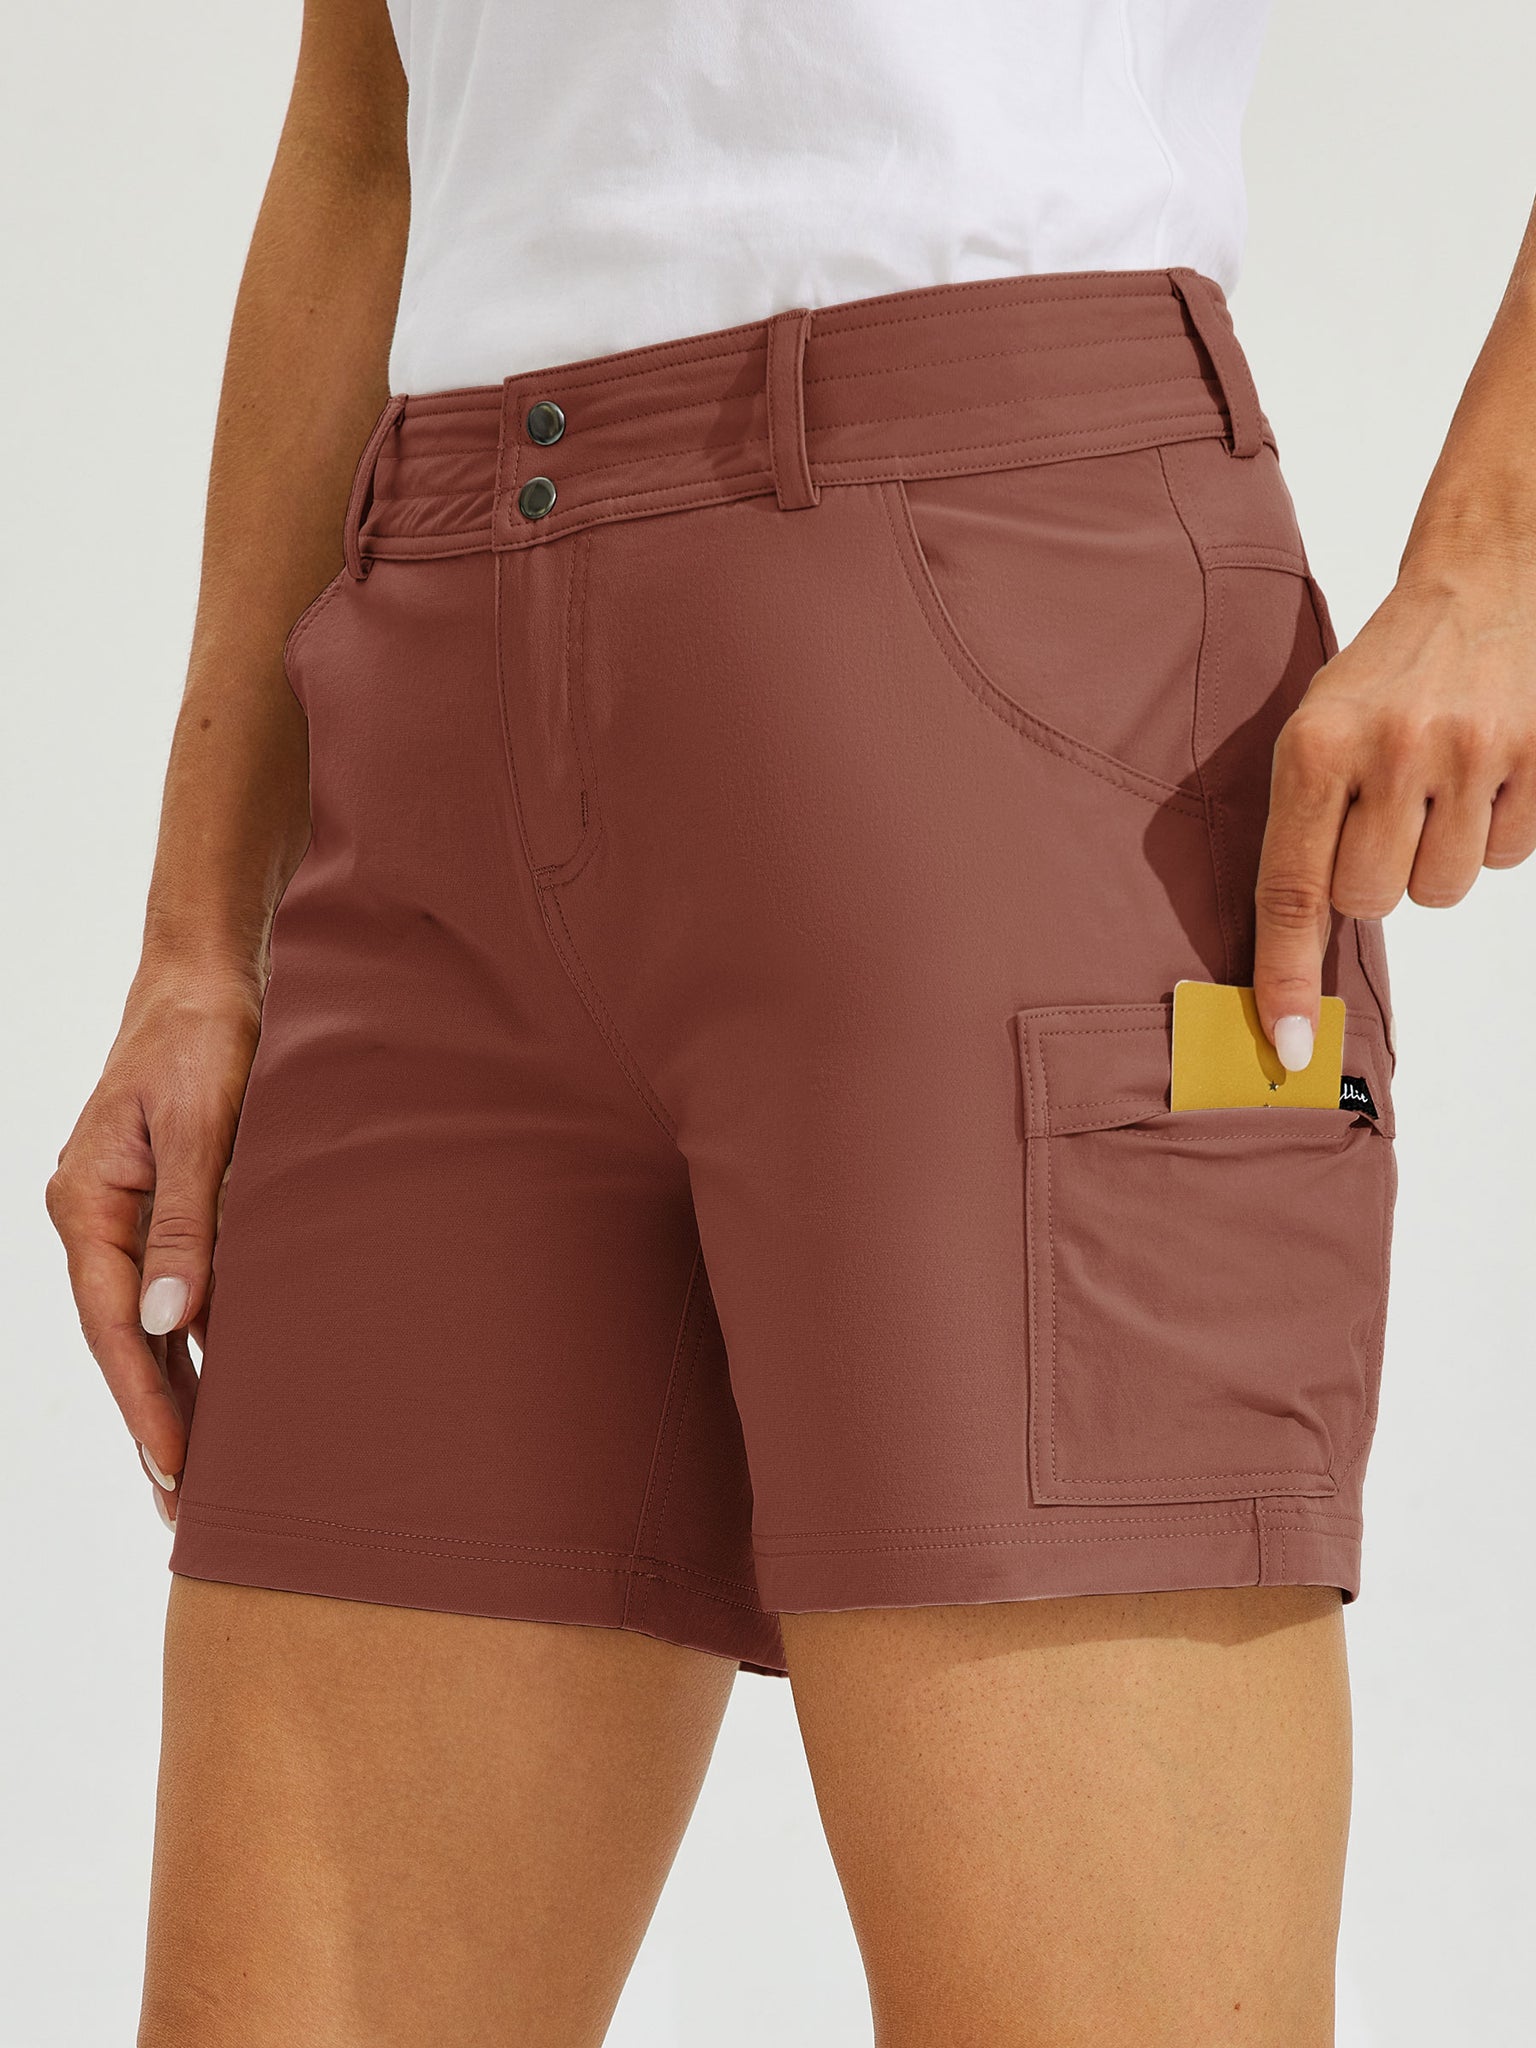 Women's Outdoor Pro Shorts 5Inch_Cacao4